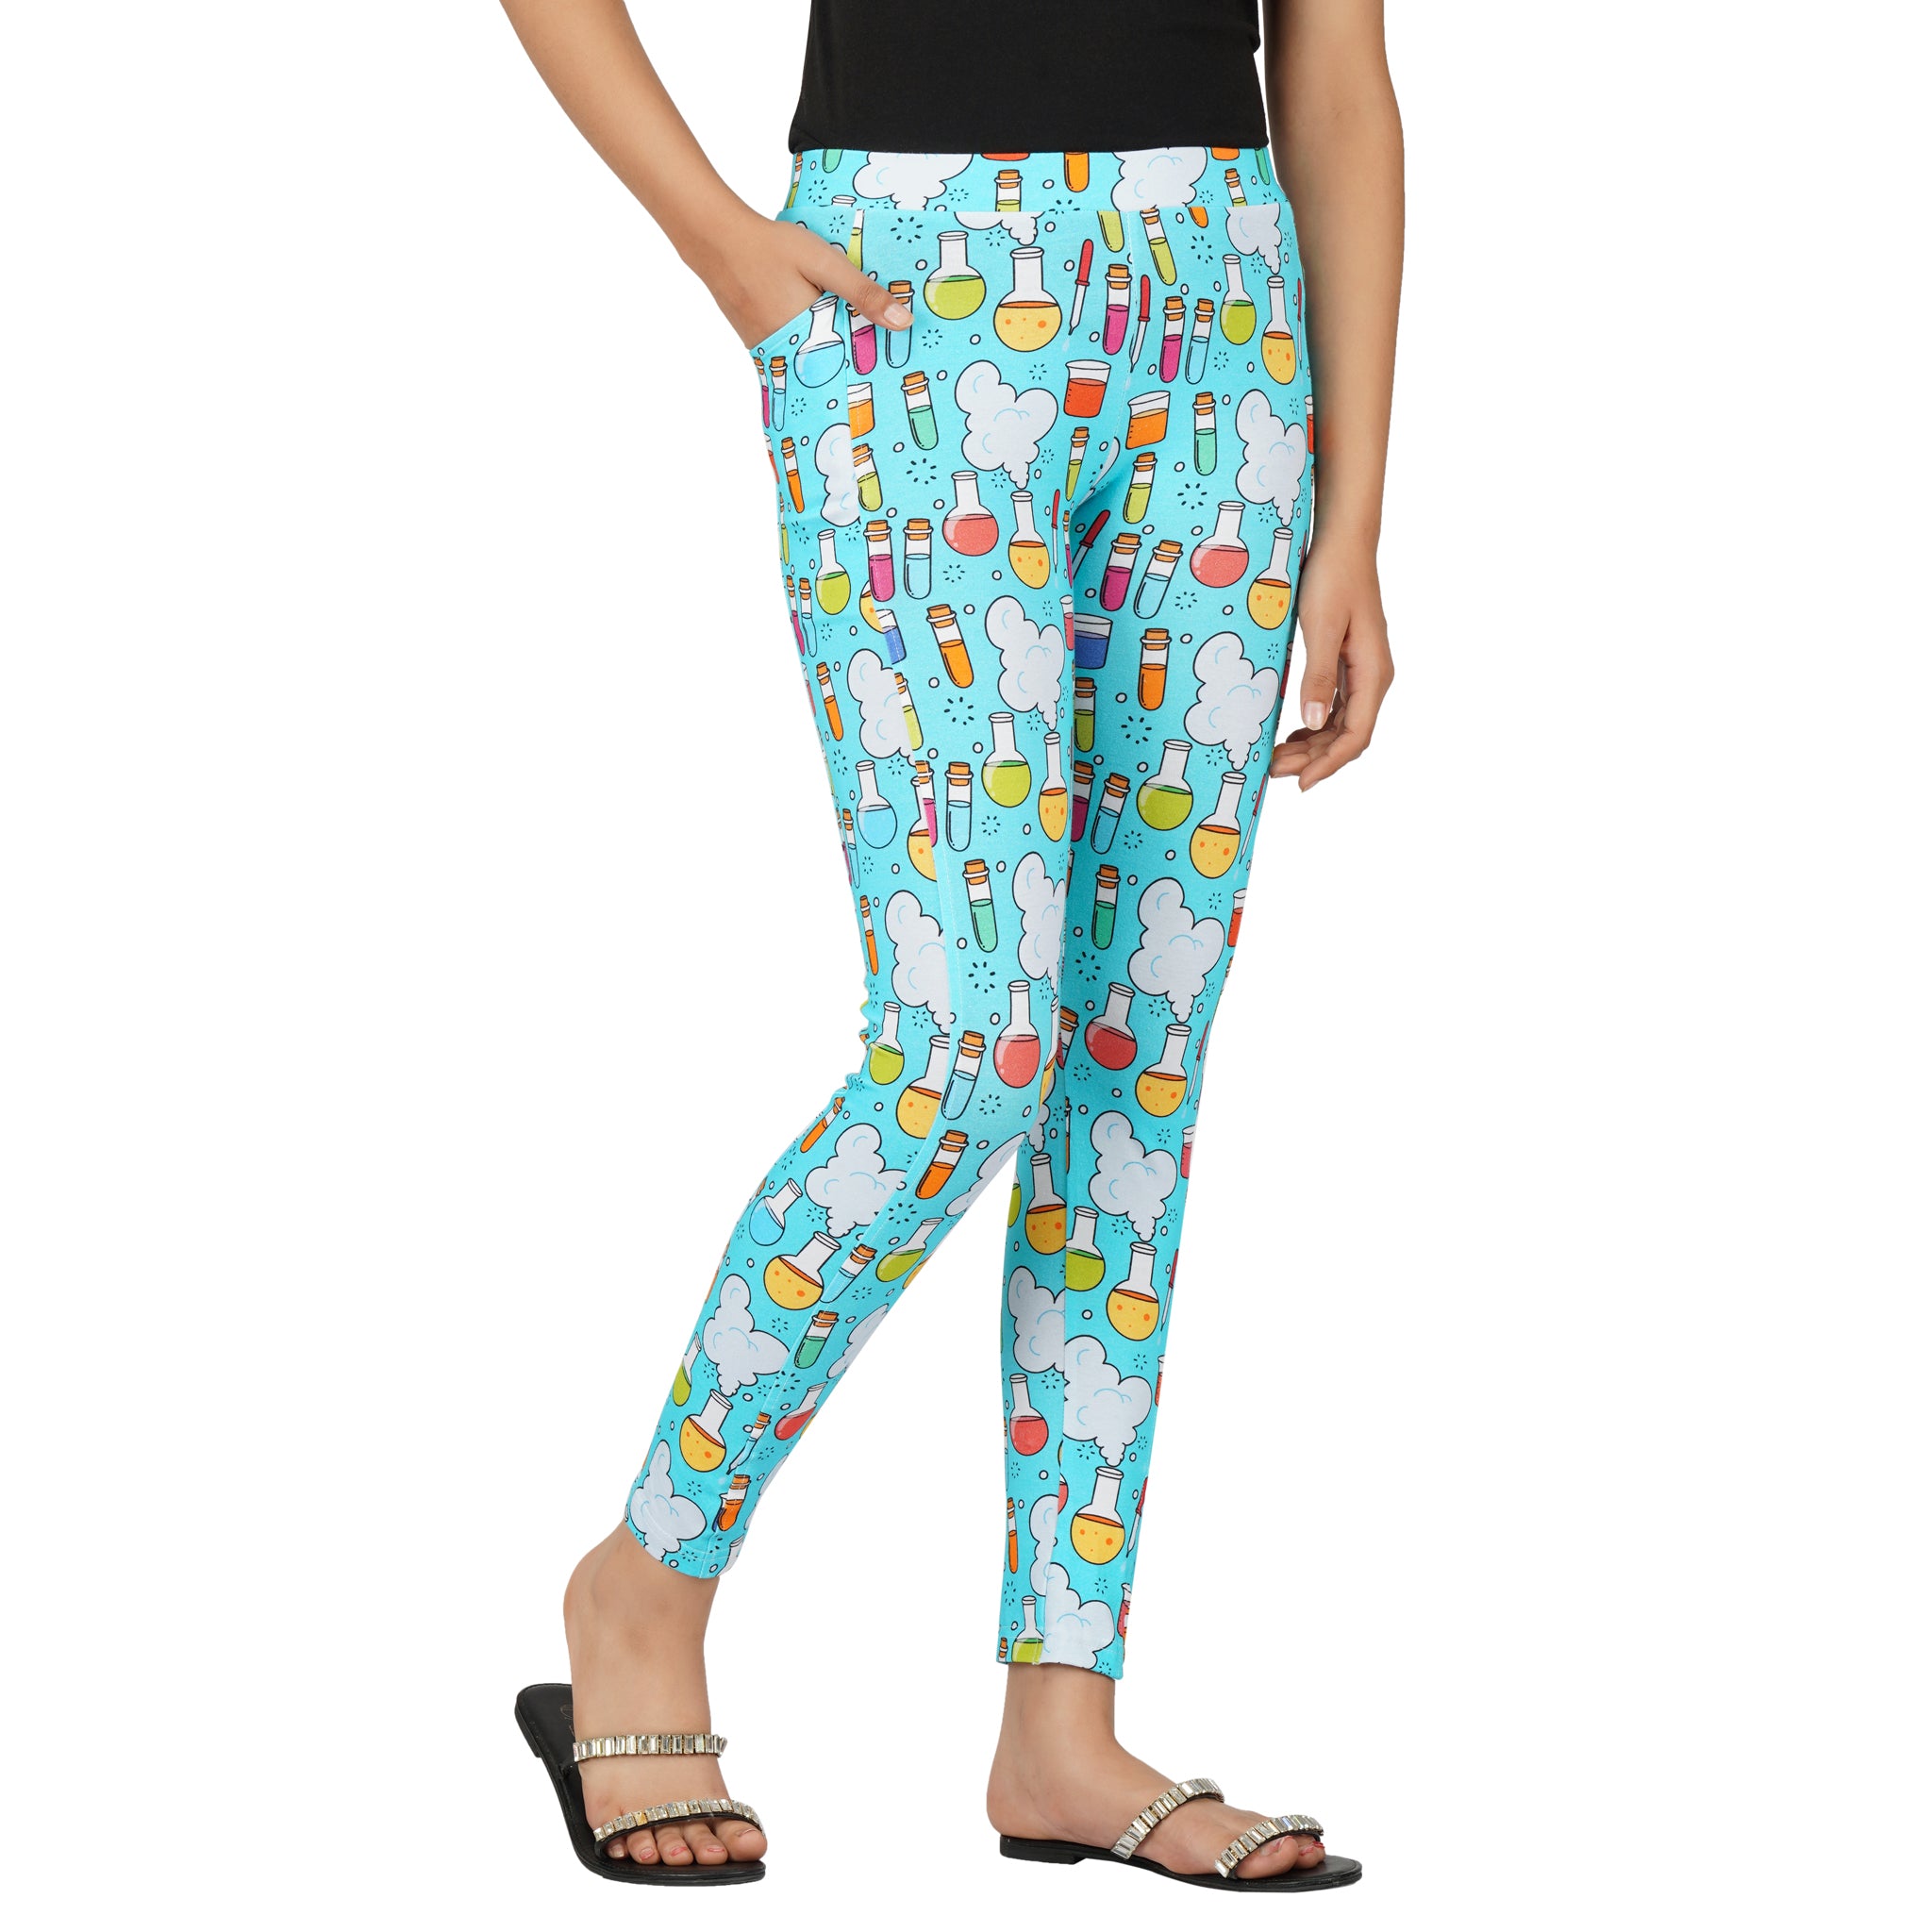 Science Equipment Kids Leggings with Pockets